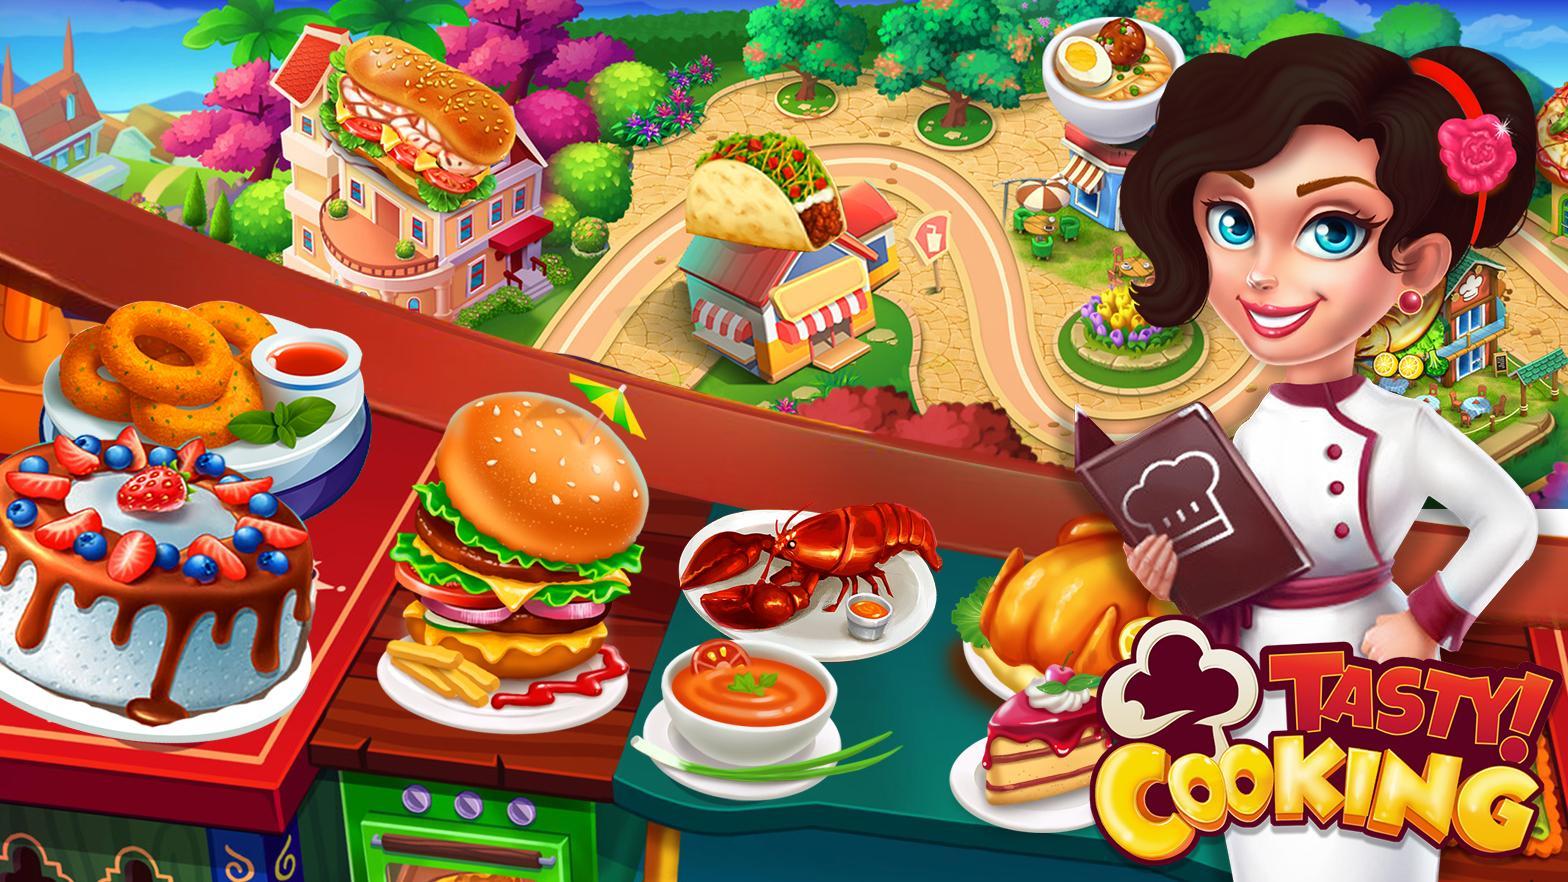 Tasty Cooking Restaurant Chef Cooking Games For Android Apk Download